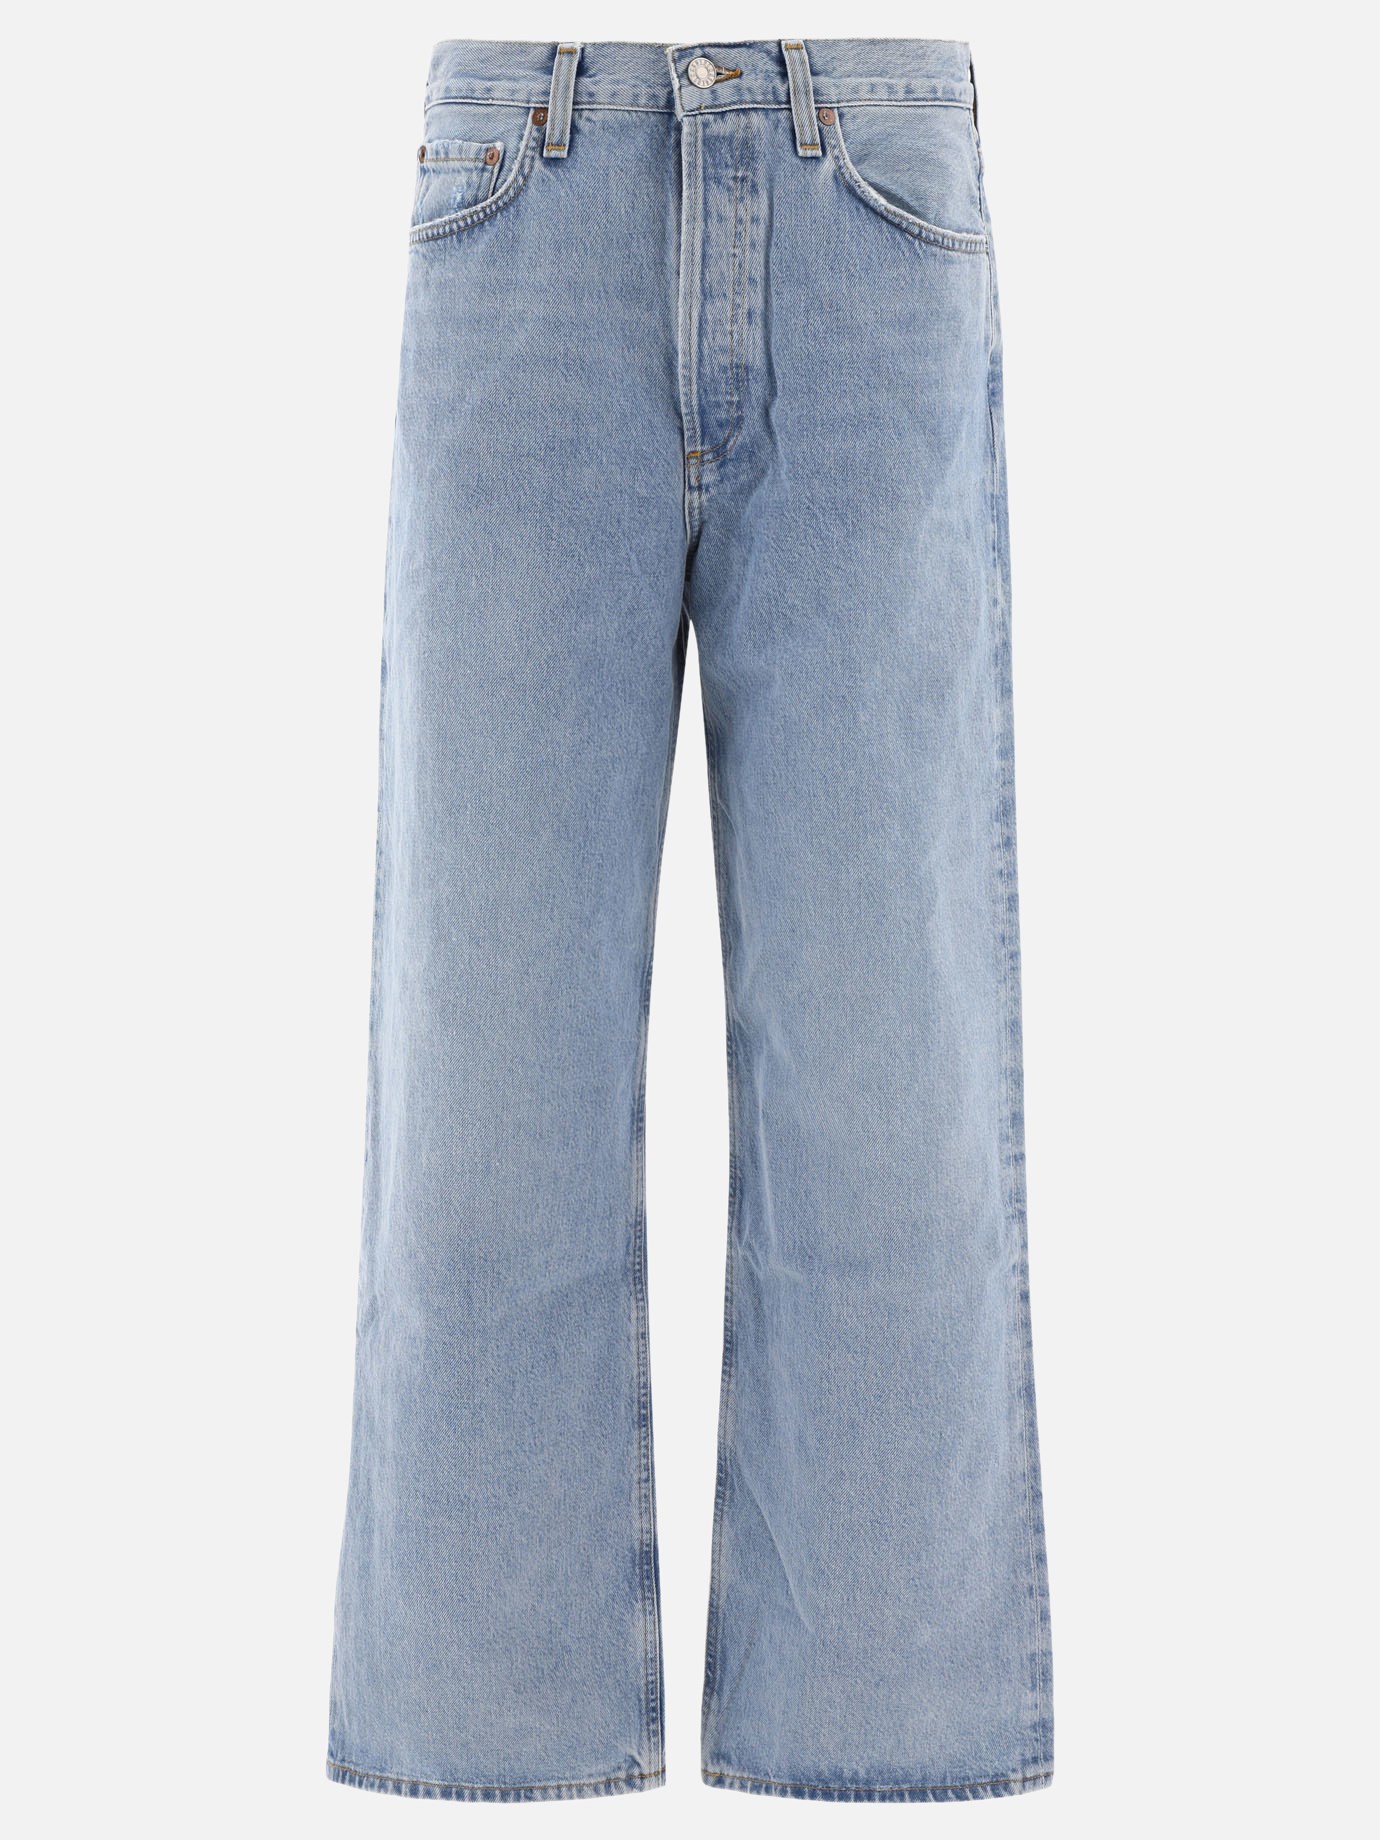  Low Rise Baggy  jeansby Agolde - 2